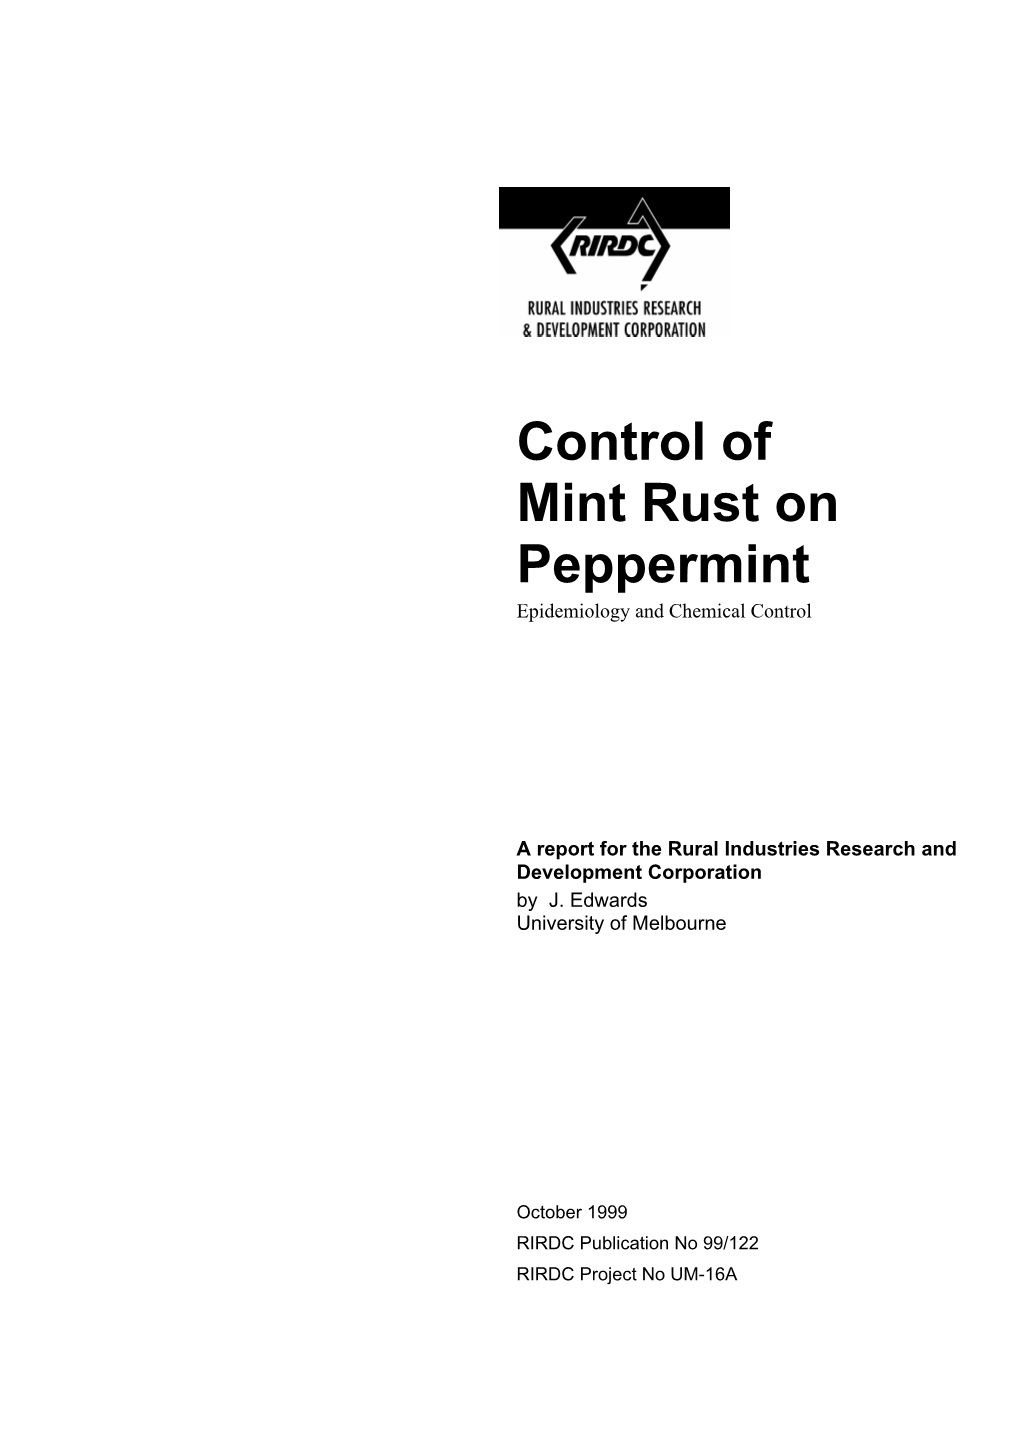 Control of Mint Rust on Peppermint Epidemiology and Chemical Control